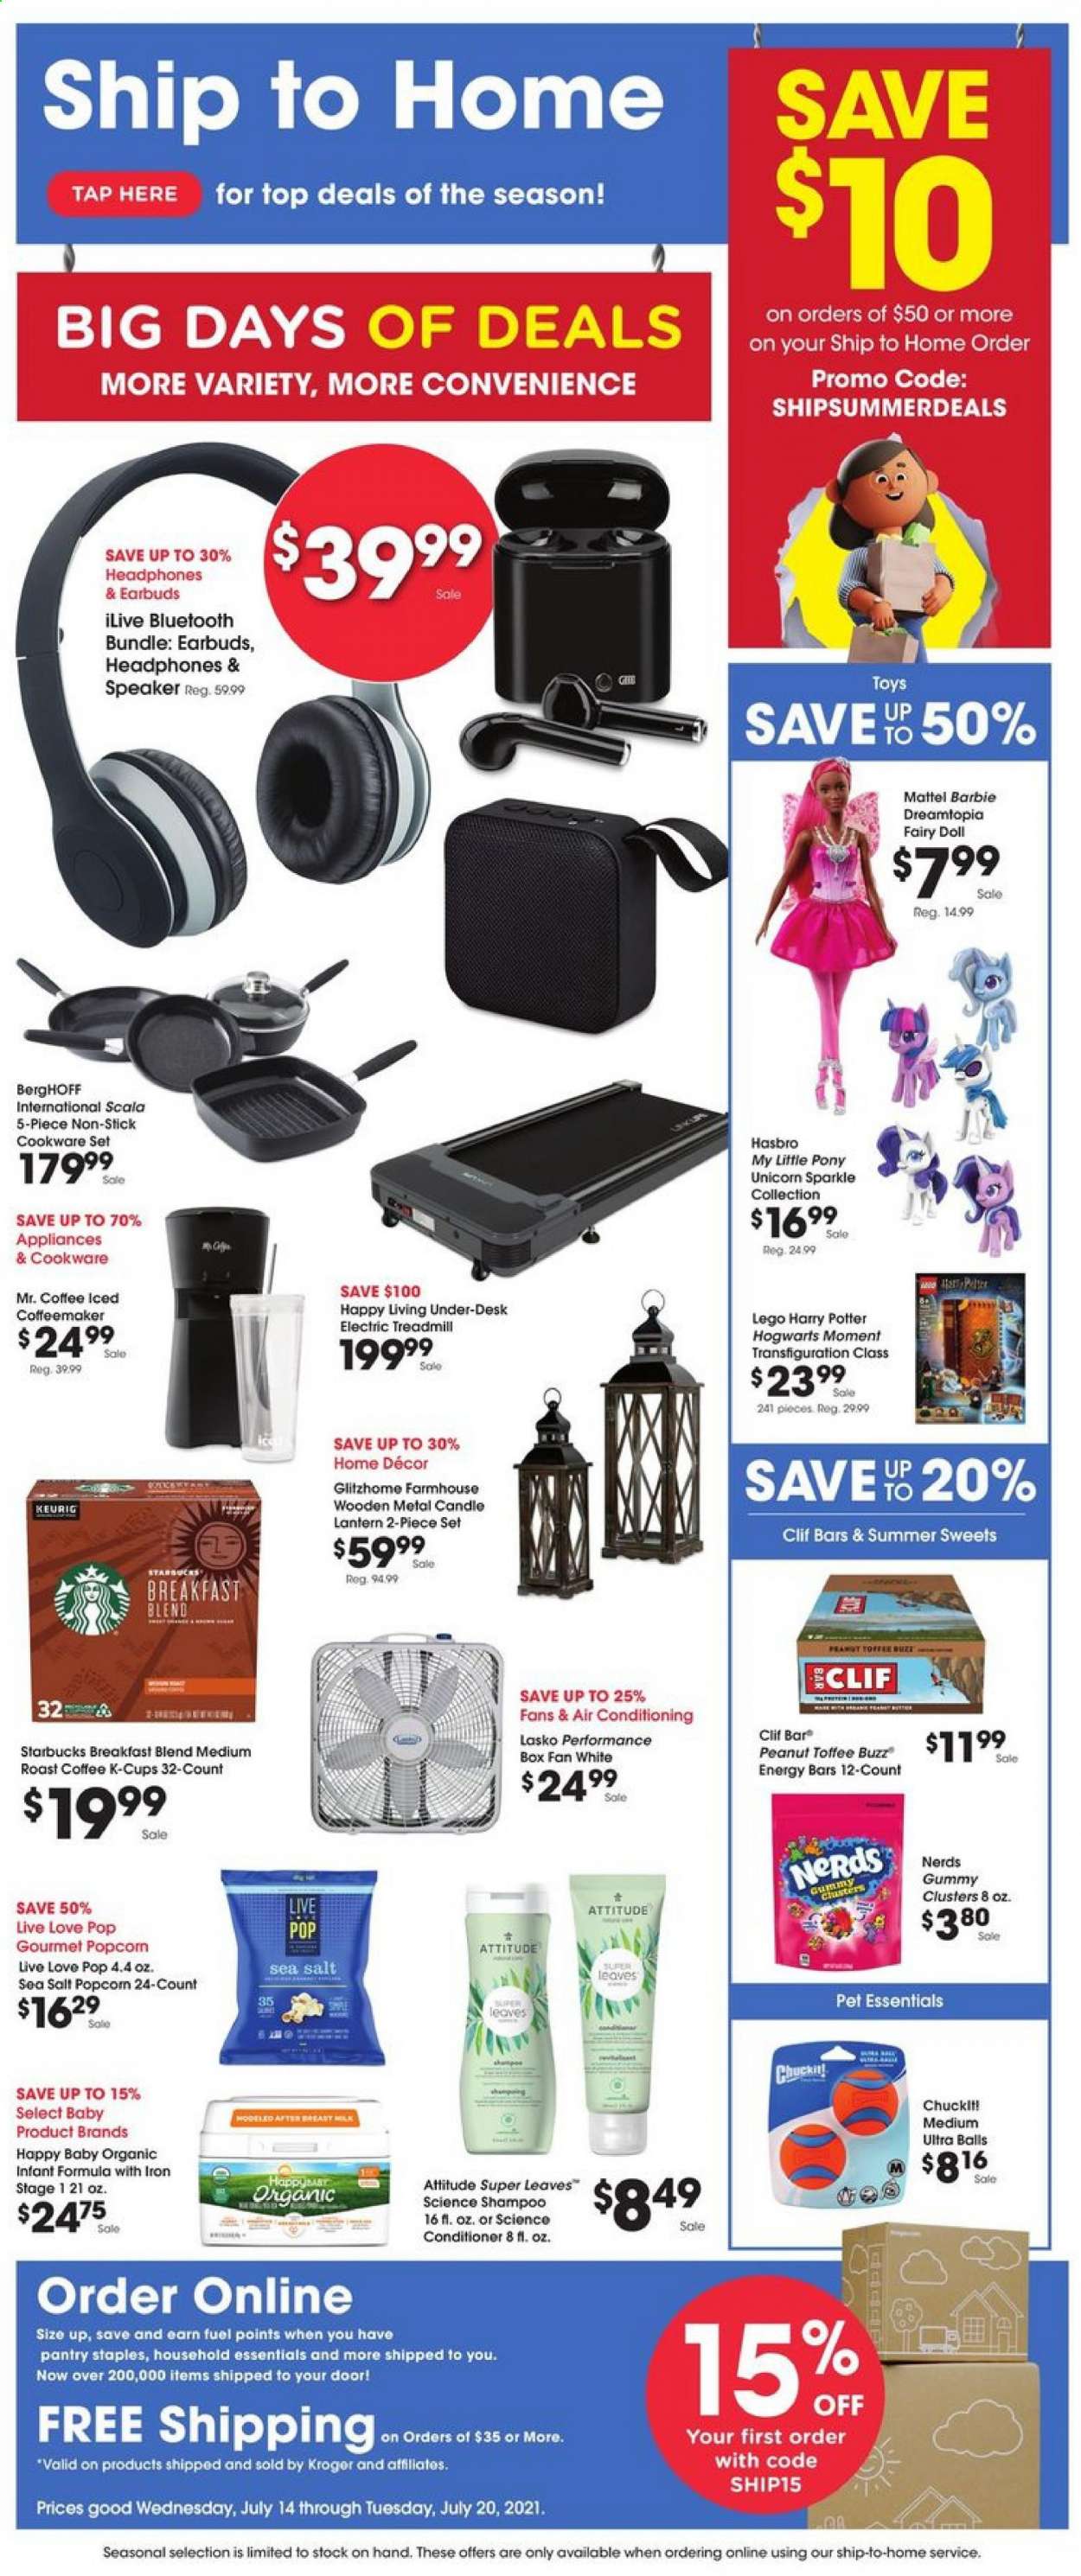 thumbnail - Baker's Flyer - 07/14/2021 - 07/20/2021 - Sales products - toffee, popcorn, sea salt, energy bar, coffee, Starbucks, coffee capsules, K-Cups, Keurig, breakfast blend, Fairy, shampoo, conditioner, Barbie, cookware set, Harry Potter, Hogwarts, candle, Chucklt!, speaker, headphones, earbuds, wall fan, iron, lantern, doll, LEGO, LEGO Harry Potter, Mattel, Hasbro, toys. Page 1.